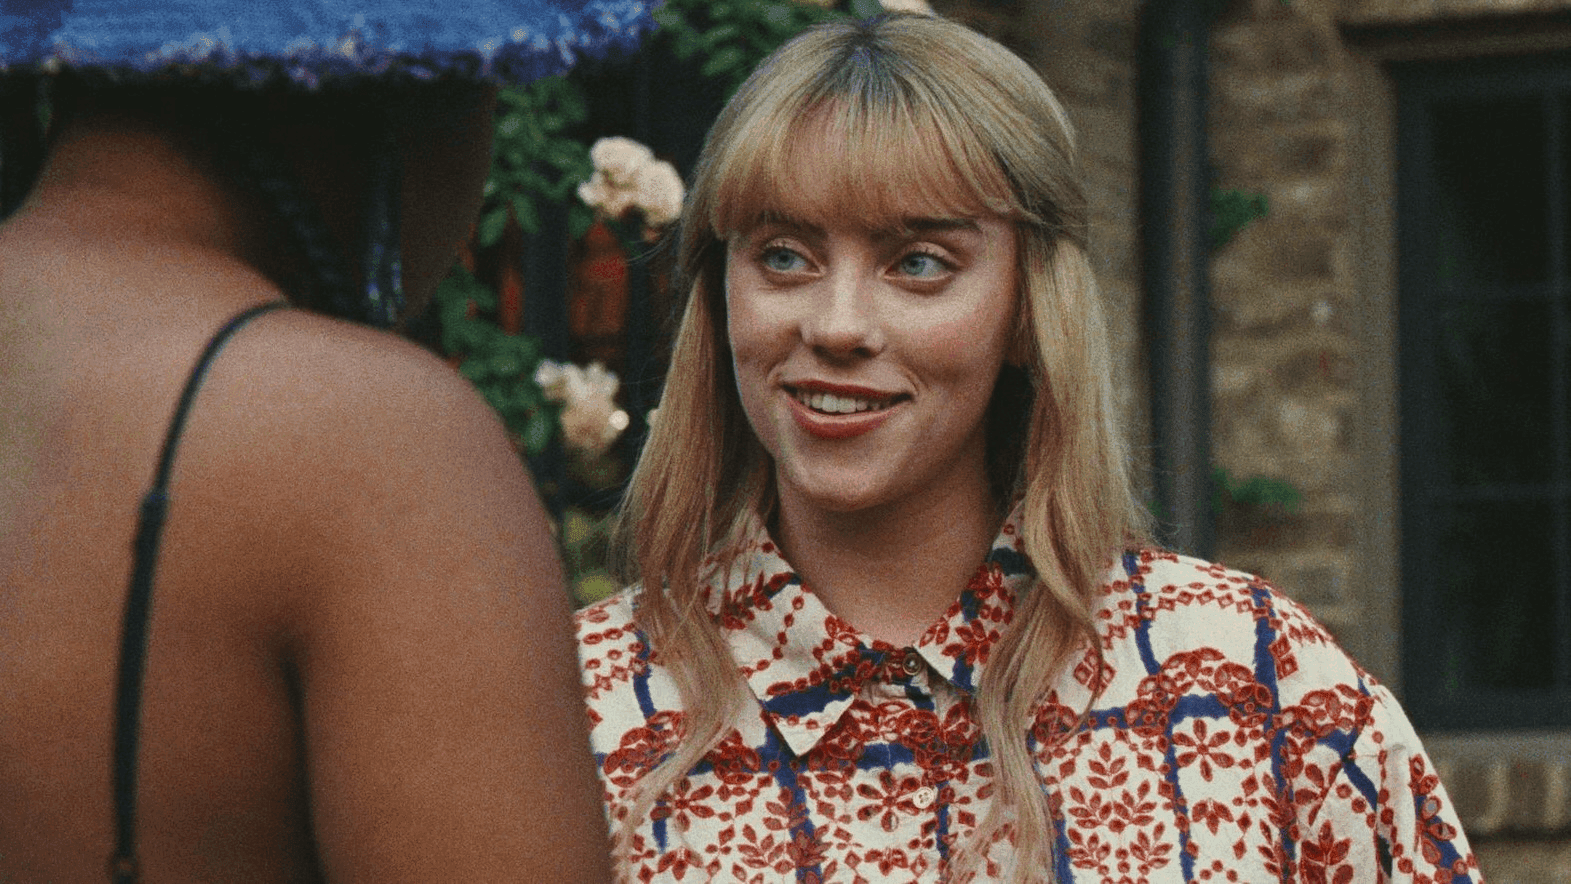 Billie Eilish smiles in her blonde hair and flower print shirt as she talks with Dominique Fishback in 'Swarm.'